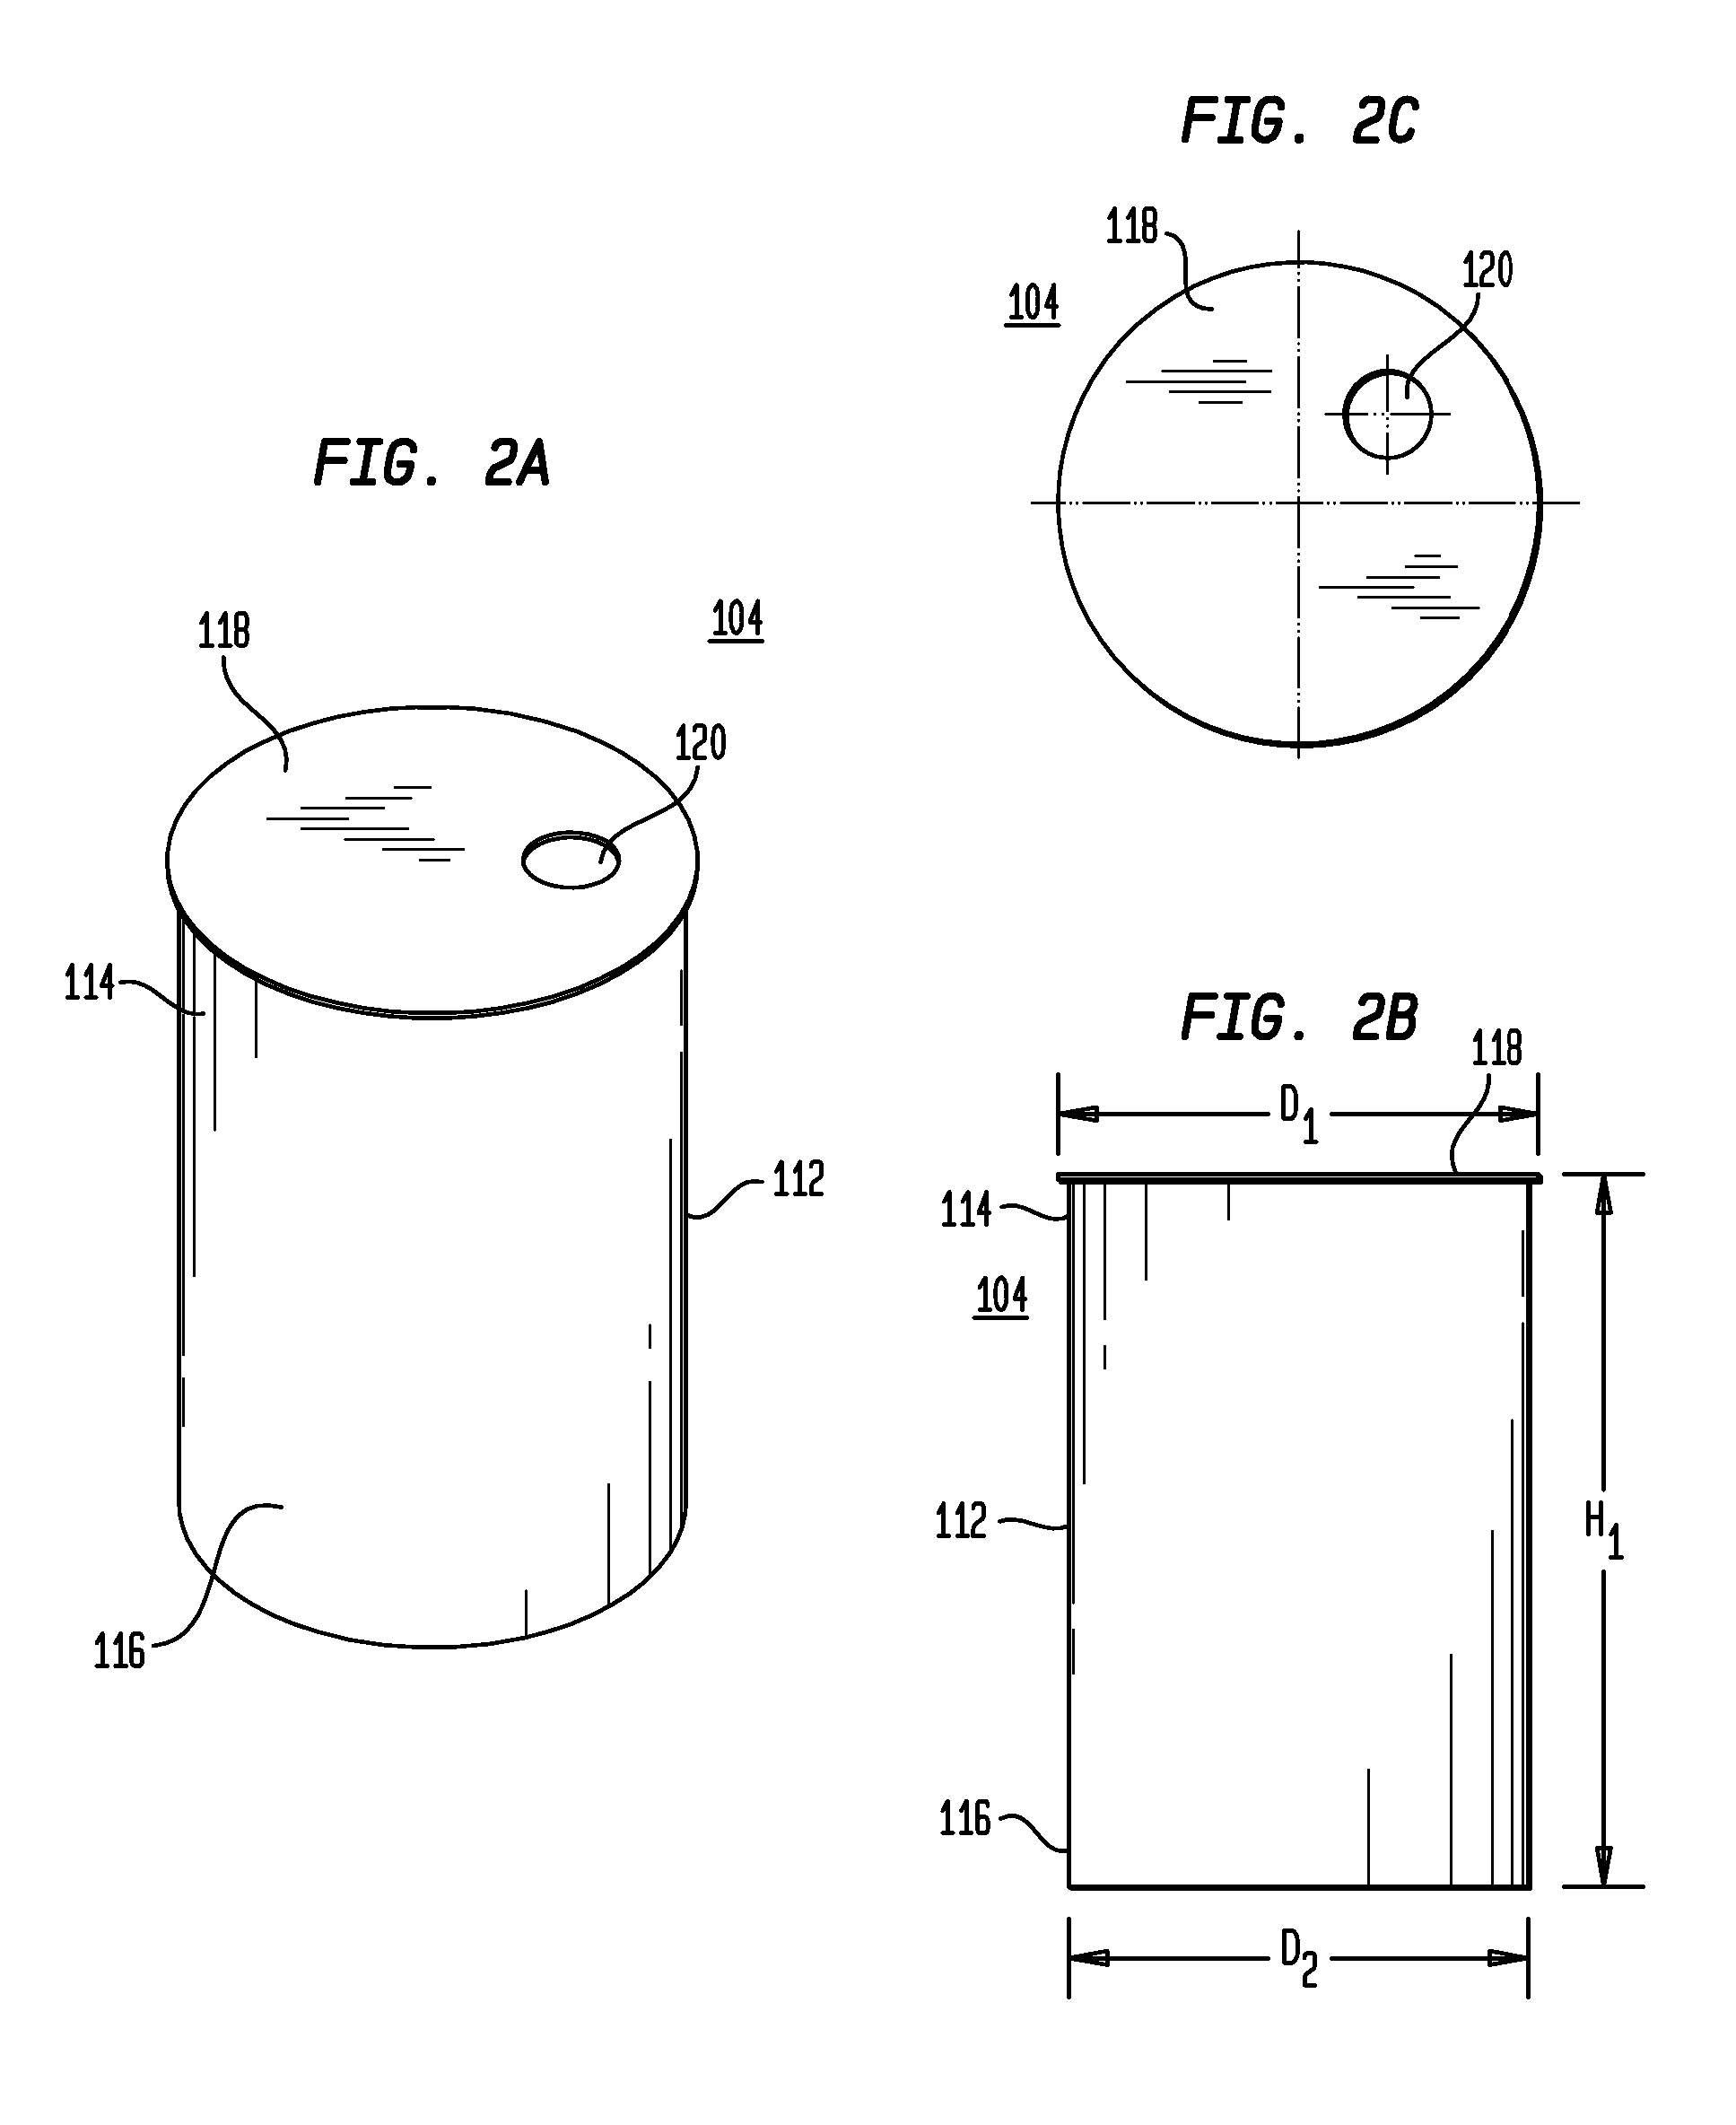 Systems and methods using gravity and buoyancy for producing energy